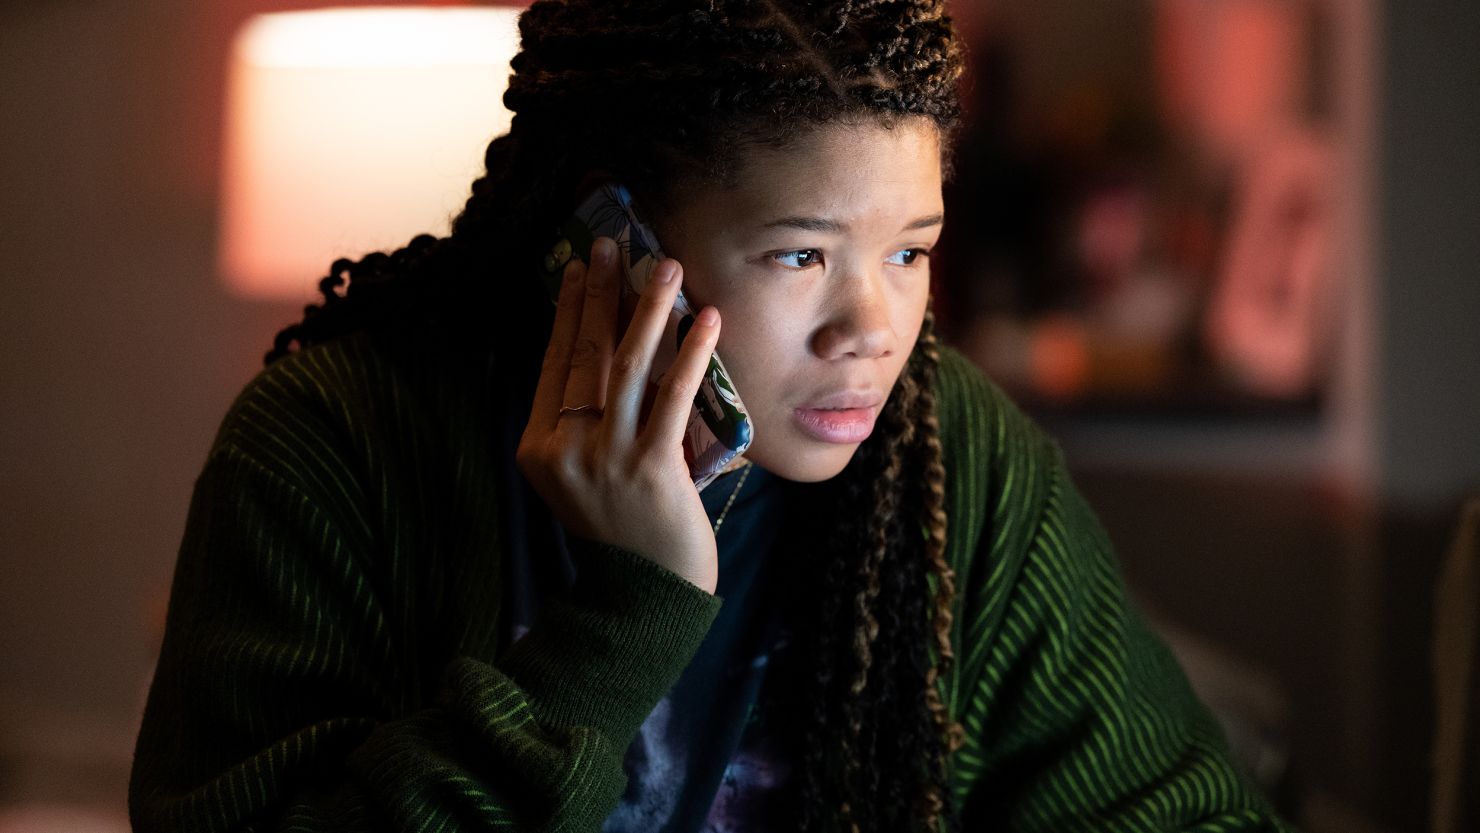 Storm Reid stars as a woman searching for her missing mom in "Missing."